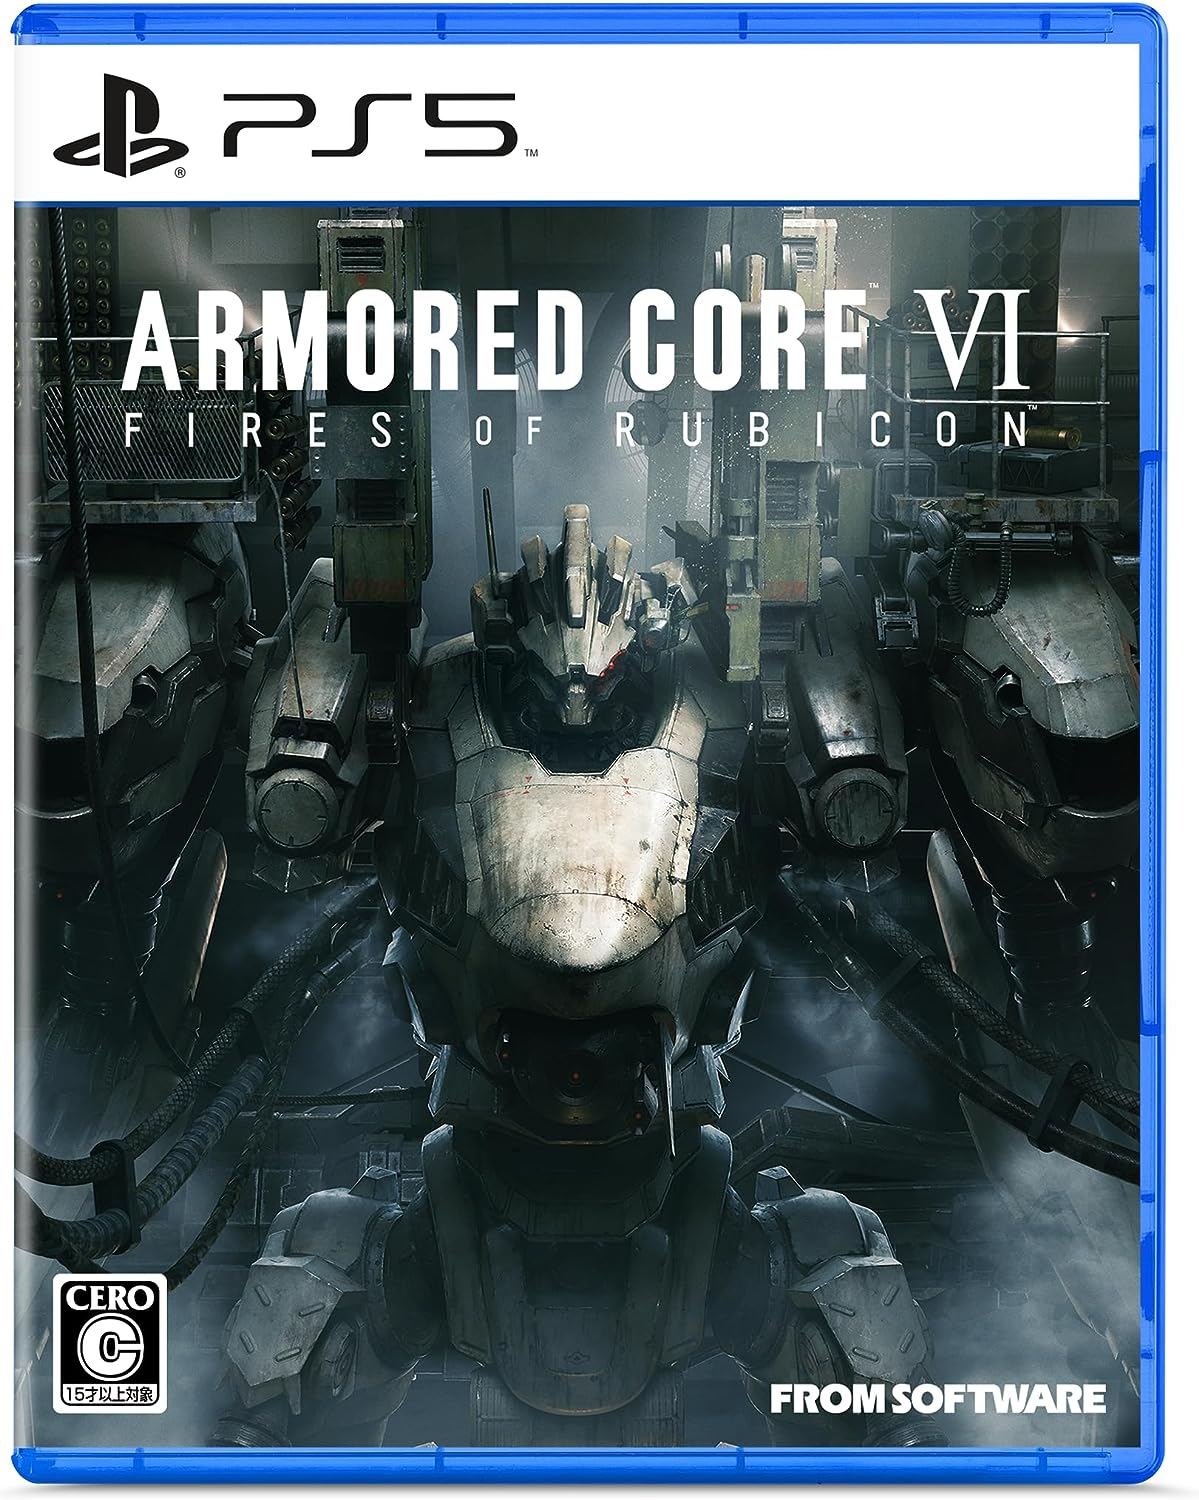 Armored Core 2 (Sony PlayStation 2, 2000) for sale online